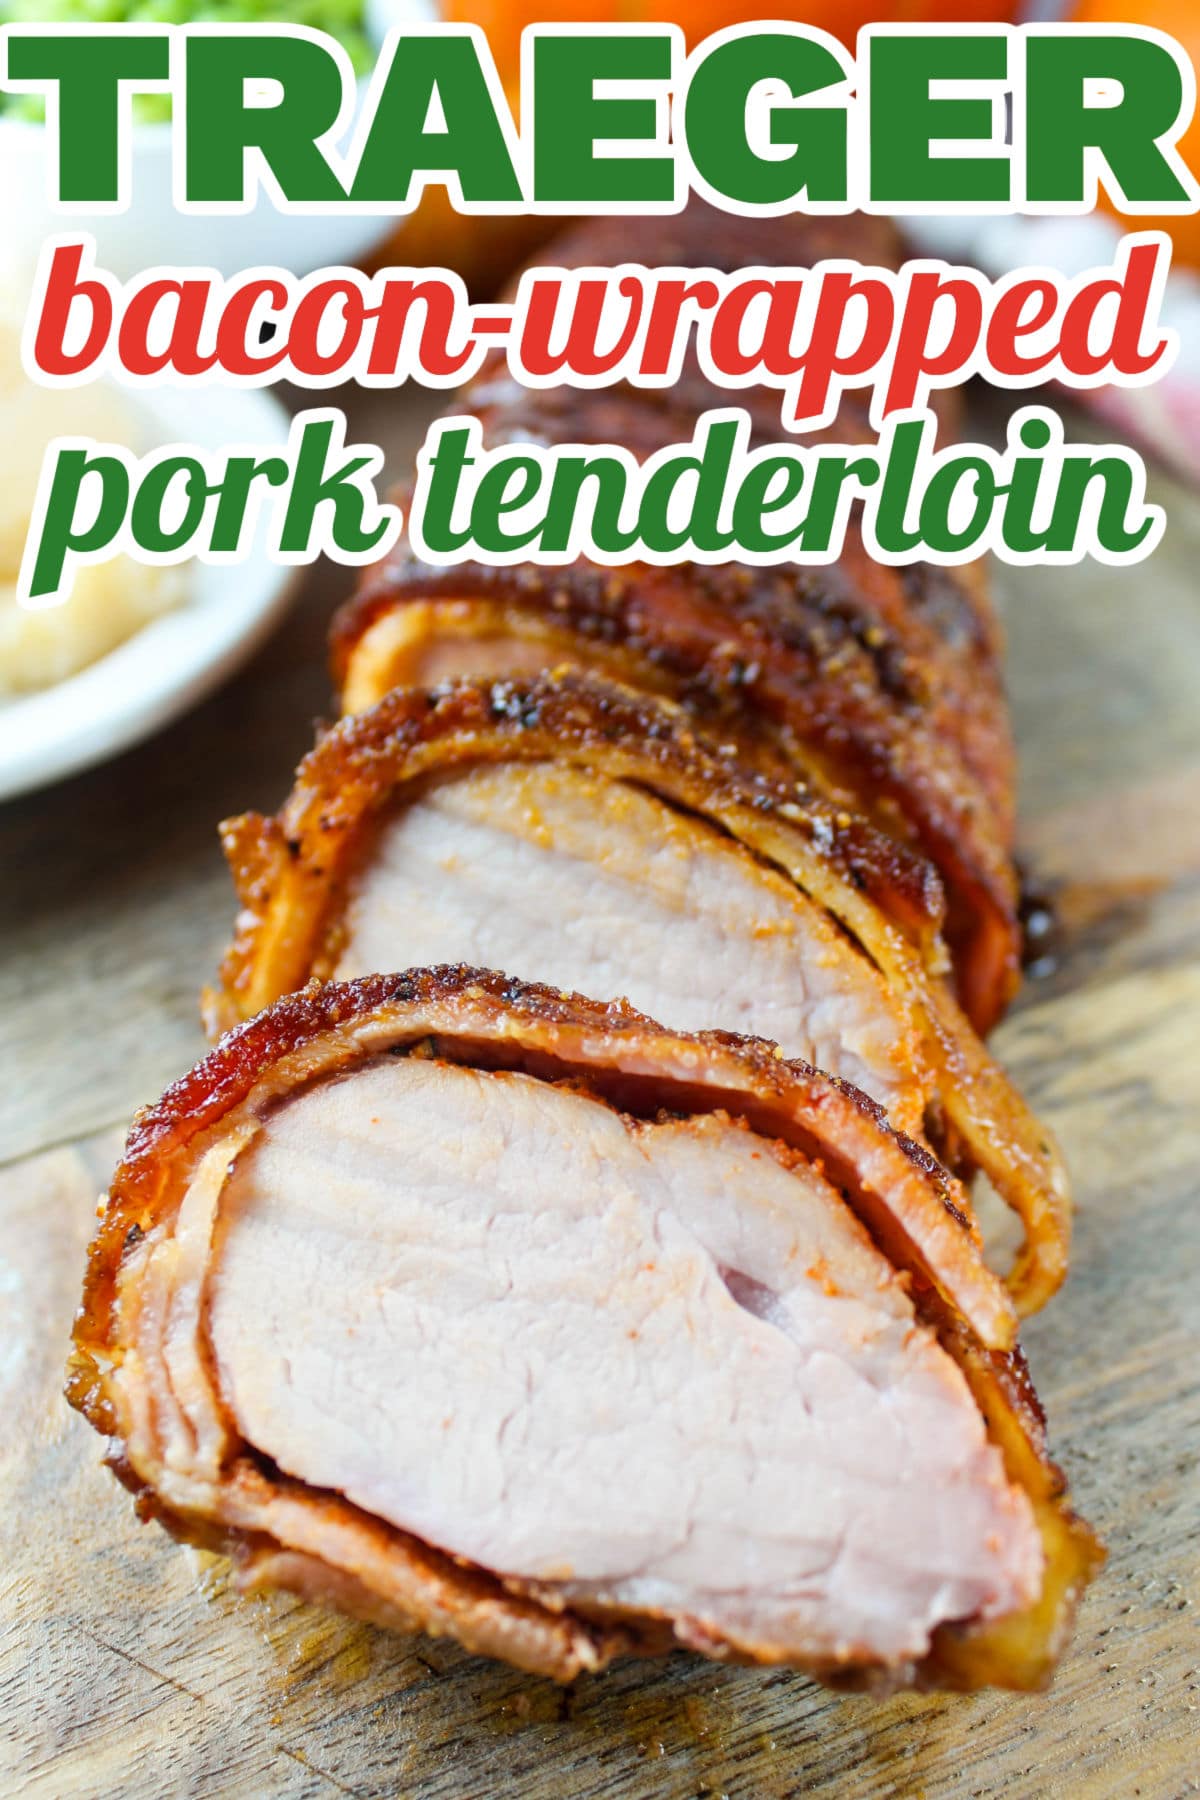 Making your Smoked Bacon-Wrapped Pork Tenderloin on the Traeger is the only way to go! You seal in all those juices and have this deliciously smokey flavor that permeates every bite! It's drool-worthy! via @foodhussy